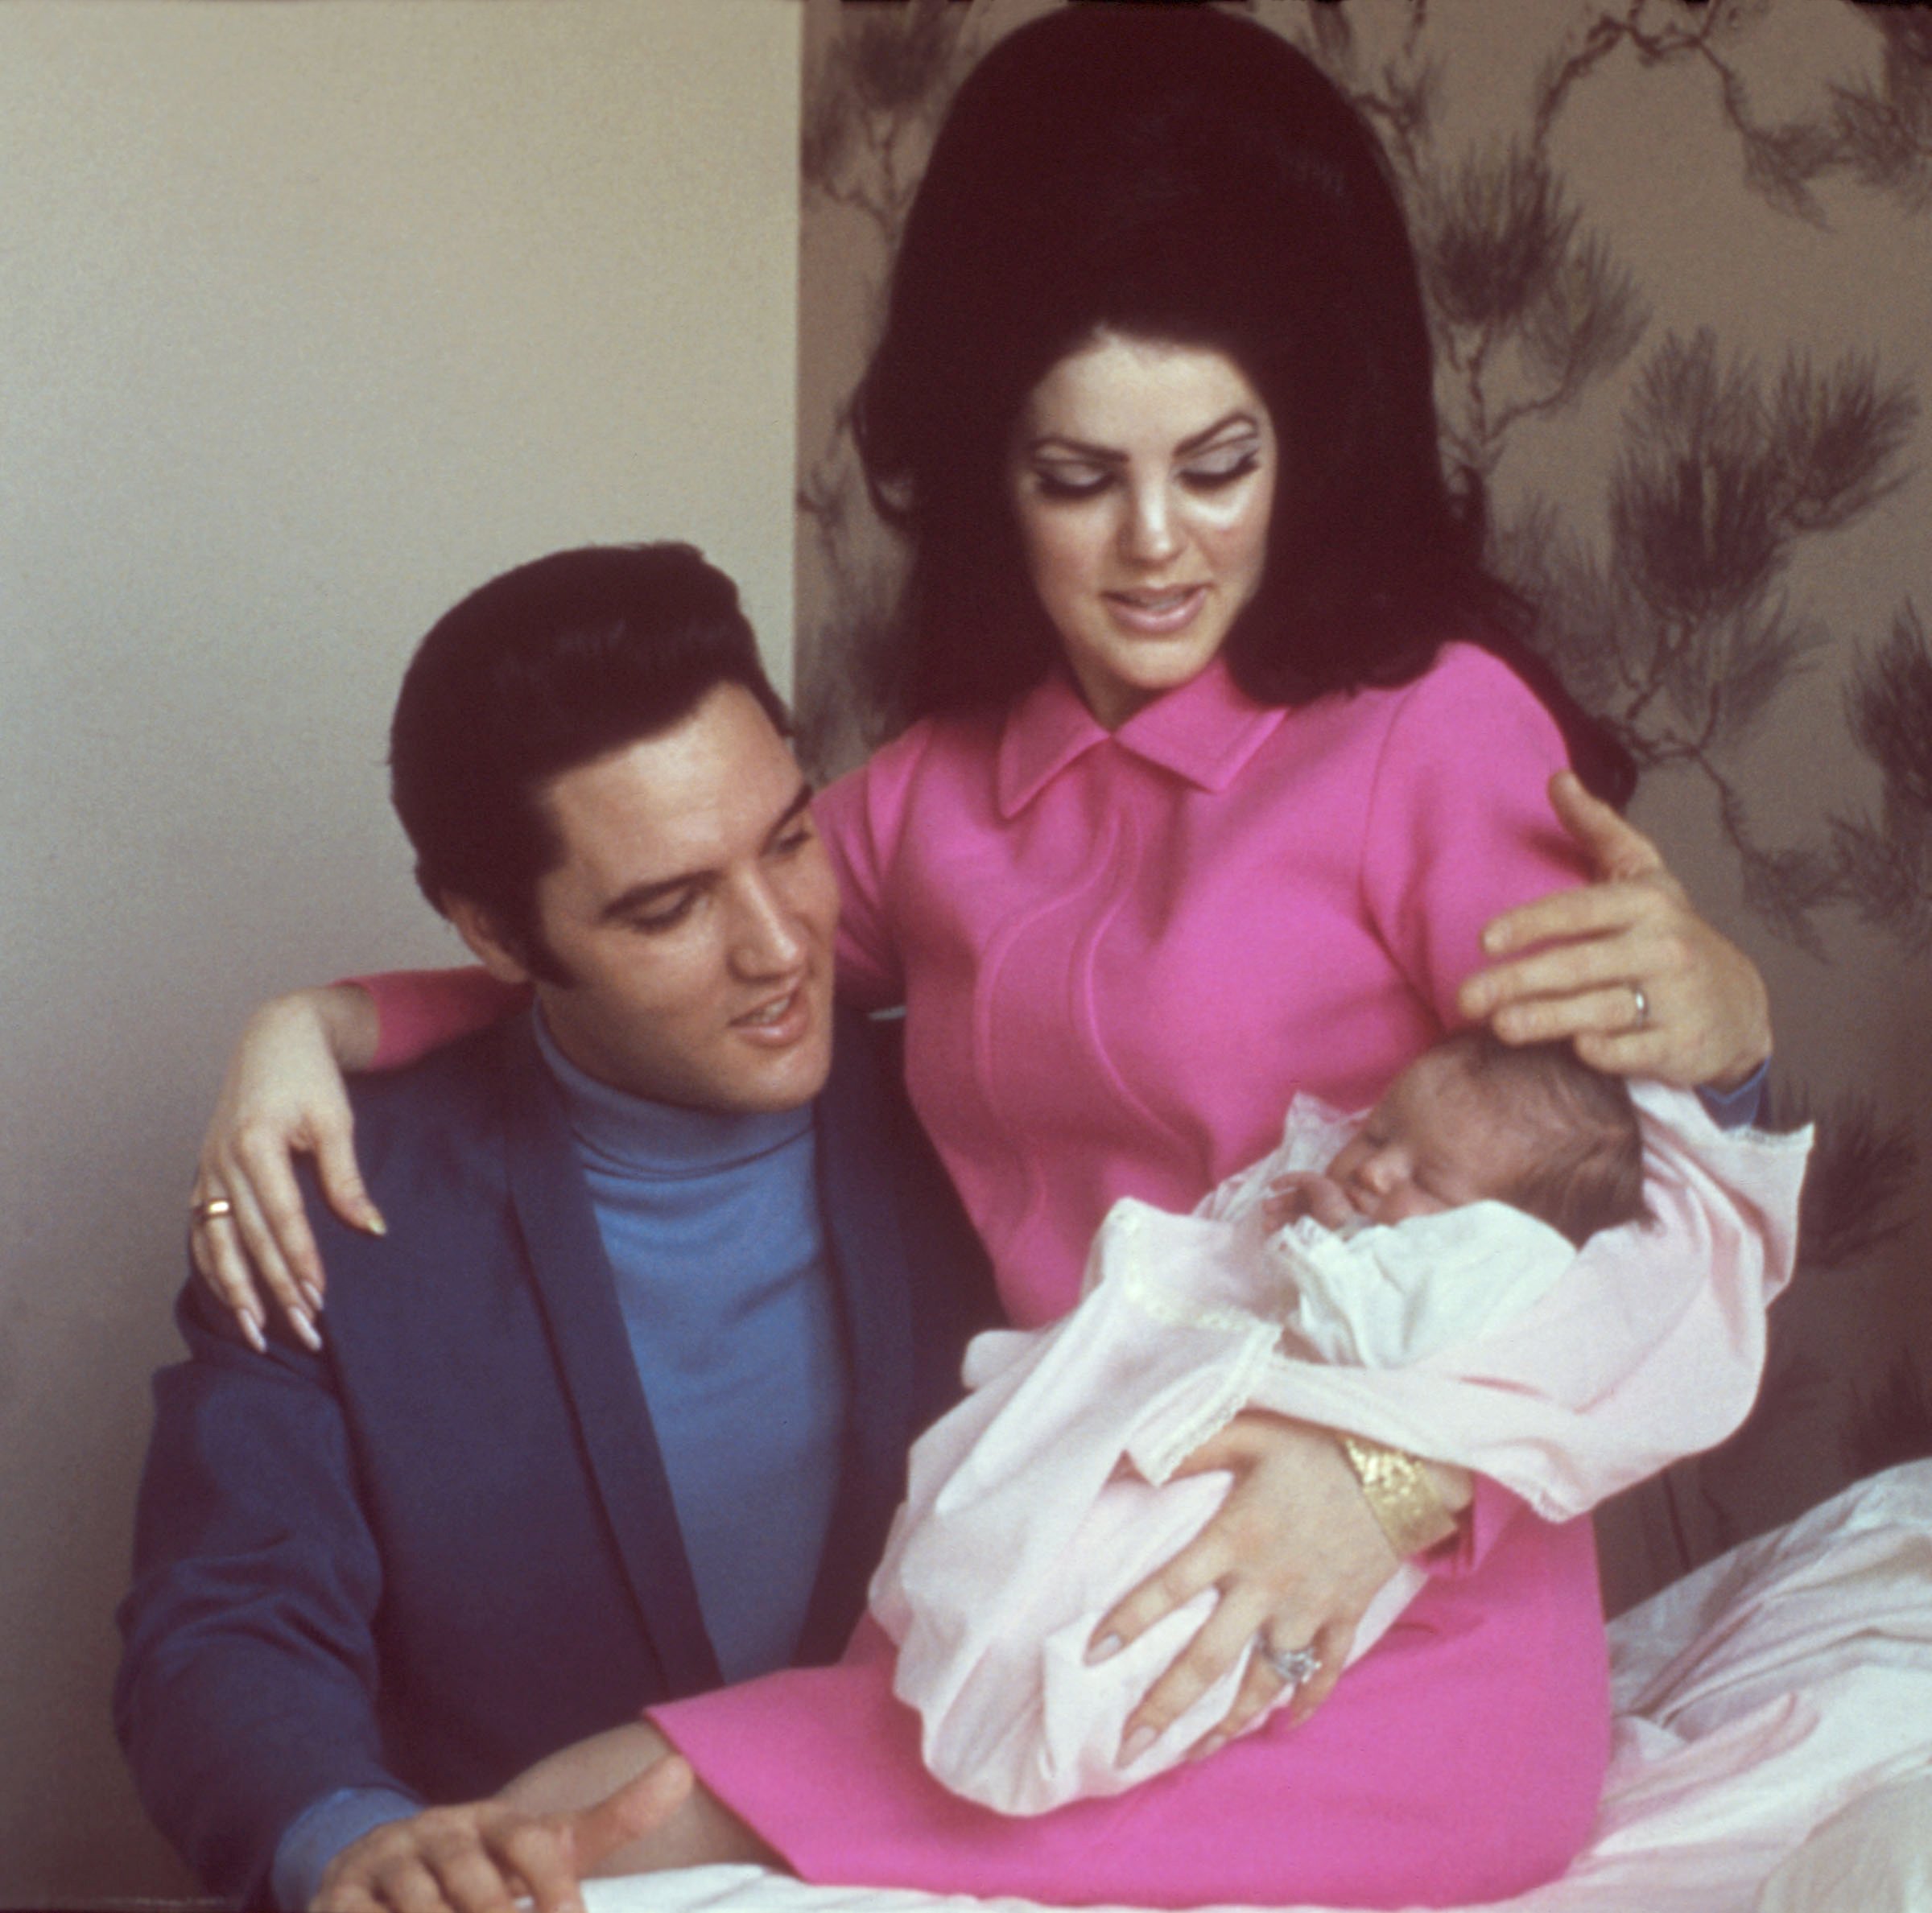  Rock and roll singer Elvis Presley with his wife Priscilla Beaulieu Presley and their 4 day old daughter Lisa Marie Presley on February 5, 1968 in Memphis, Tennessee. 